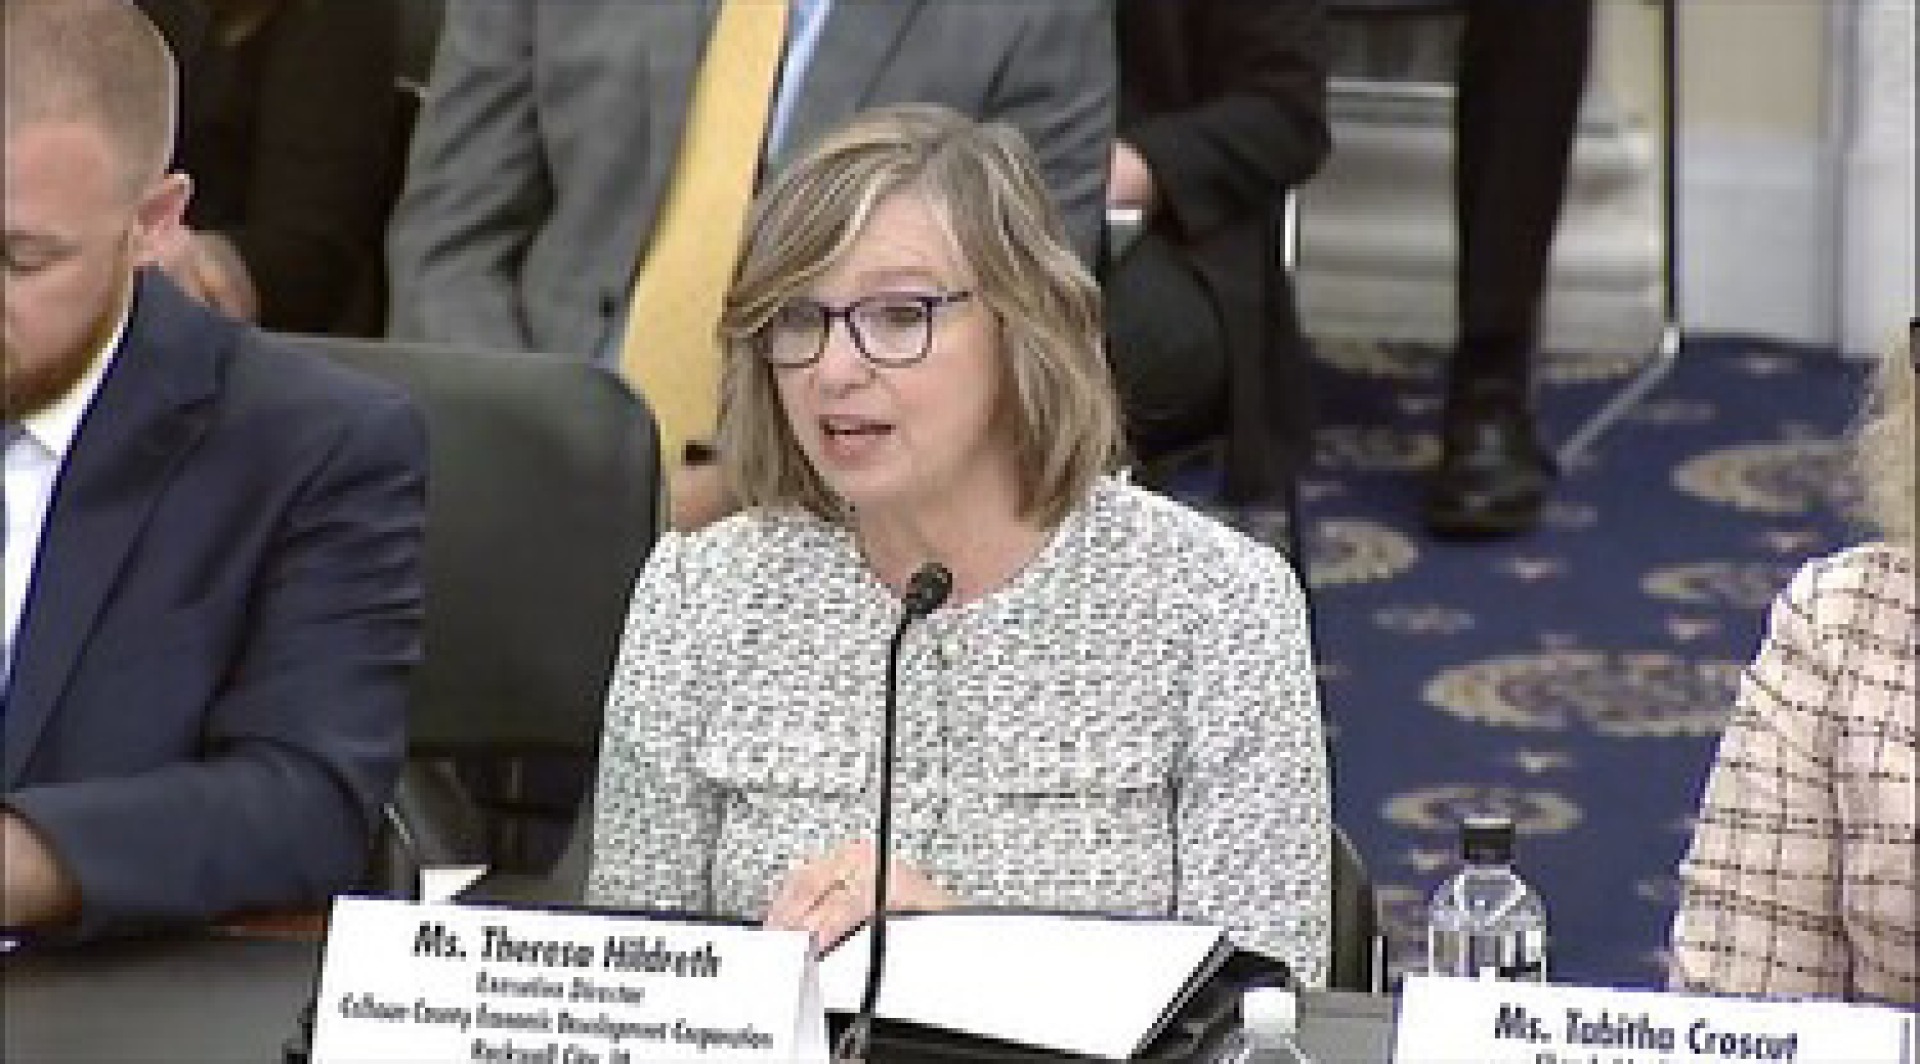 Theresa Hildreth testifies in Washington, D.C. about the challenges and opportunities of rural business succession planning.